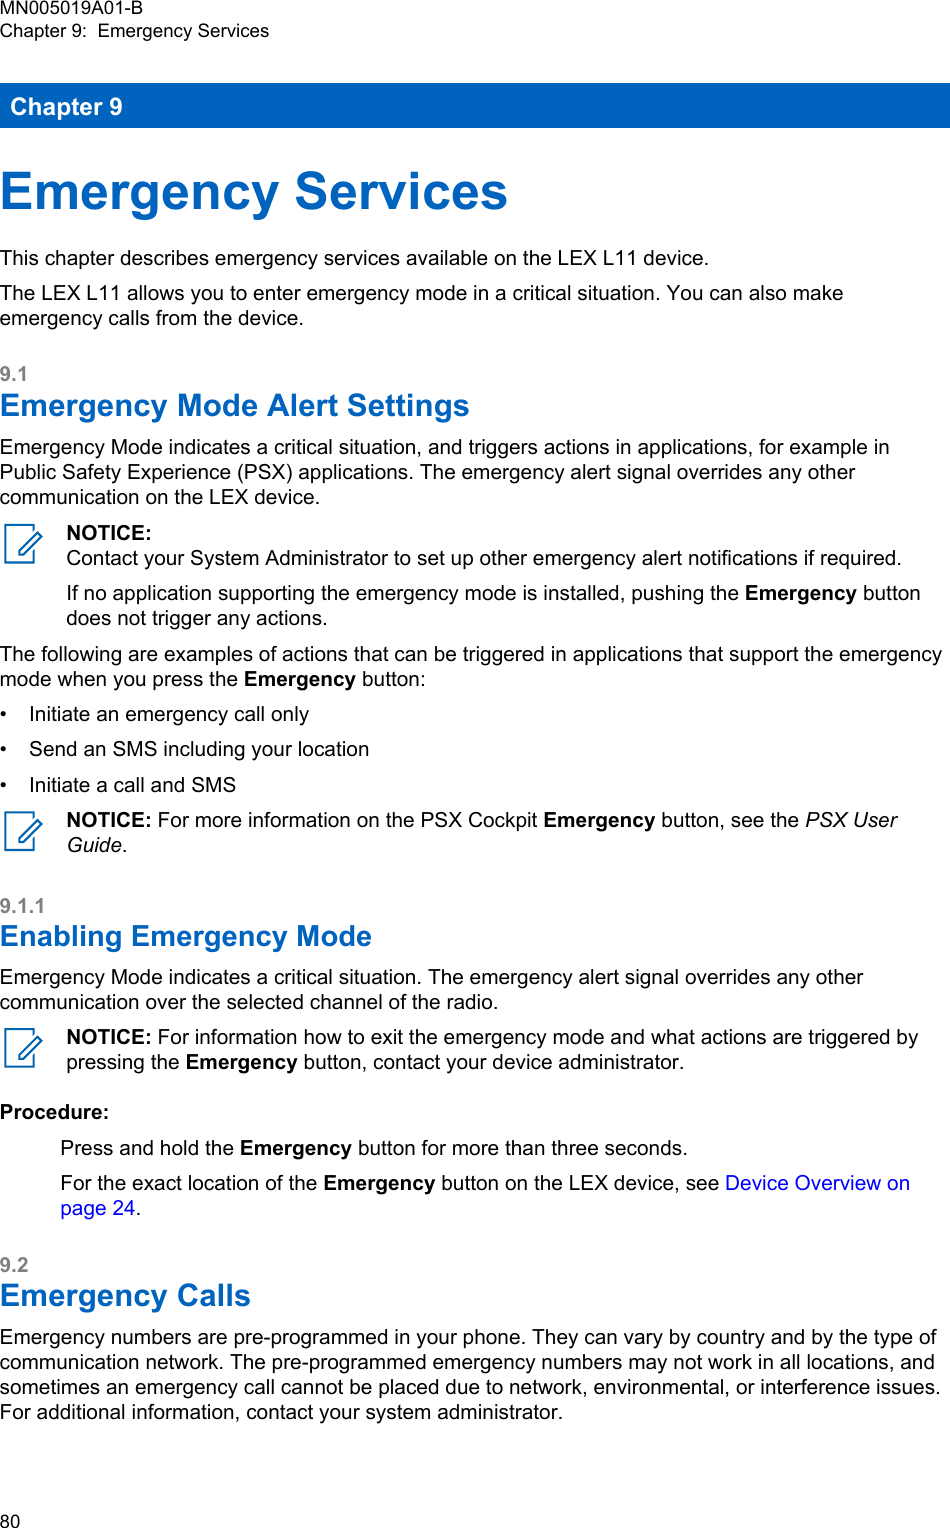 Chapter 9Emergency ServicesThis chapter describes emergency services available on the LEX L11 device.The LEX L11 allows you to enter emergency mode in a critical situation. You can also makeemergency calls from the device.9.1Emergency Mode Alert SettingsEmergency Mode indicates a critical situation, and triggers actions in applications, for example inPublic Safety Experience (PSX) applications. The emergency alert signal overrides any othercommunication on the LEX device.NOTICE:Contact your System Administrator to set up other emergency alert notifications if required.If no application supporting the emergency mode is installed, pushing the Emergency buttondoes not trigger any actions.The following are examples of actions that can be triggered in applications that support the emergencymode when you press the Emergency button:• Initiate an emergency call only• Send an SMS including your location• Initiate a call and SMSNOTICE: For more information on the PSX Cockpit Emergency button, see the PSX UserGuide.9.1.1Enabling Emergency ModeEmergency Mode indicates a critical situation. The emergency alert signal overrides any othercommunication over the selected channel of the radio.NOTICE: For information how to exit the emergency mode and what actions are triggered bypressing the Emergency button, contact your device administrator.Procedure:Press and hold the Emergency button for more than three seconds.For the exact location of the Emergency button on the LEX device, see Device Overview onpage 24.9.2Emergency CallsEmergency numbers are pre-programmed in your phone. They can vary by country and by the type ofcommunication network. The pre-programmed emergency numbers may not work in all locations, andsometimes an emergency call cannot be placed due to network, environmental, or interference issues.For additional information, contact your system administrator.MN005019A01-BChapter 9:  Emergency Services80  